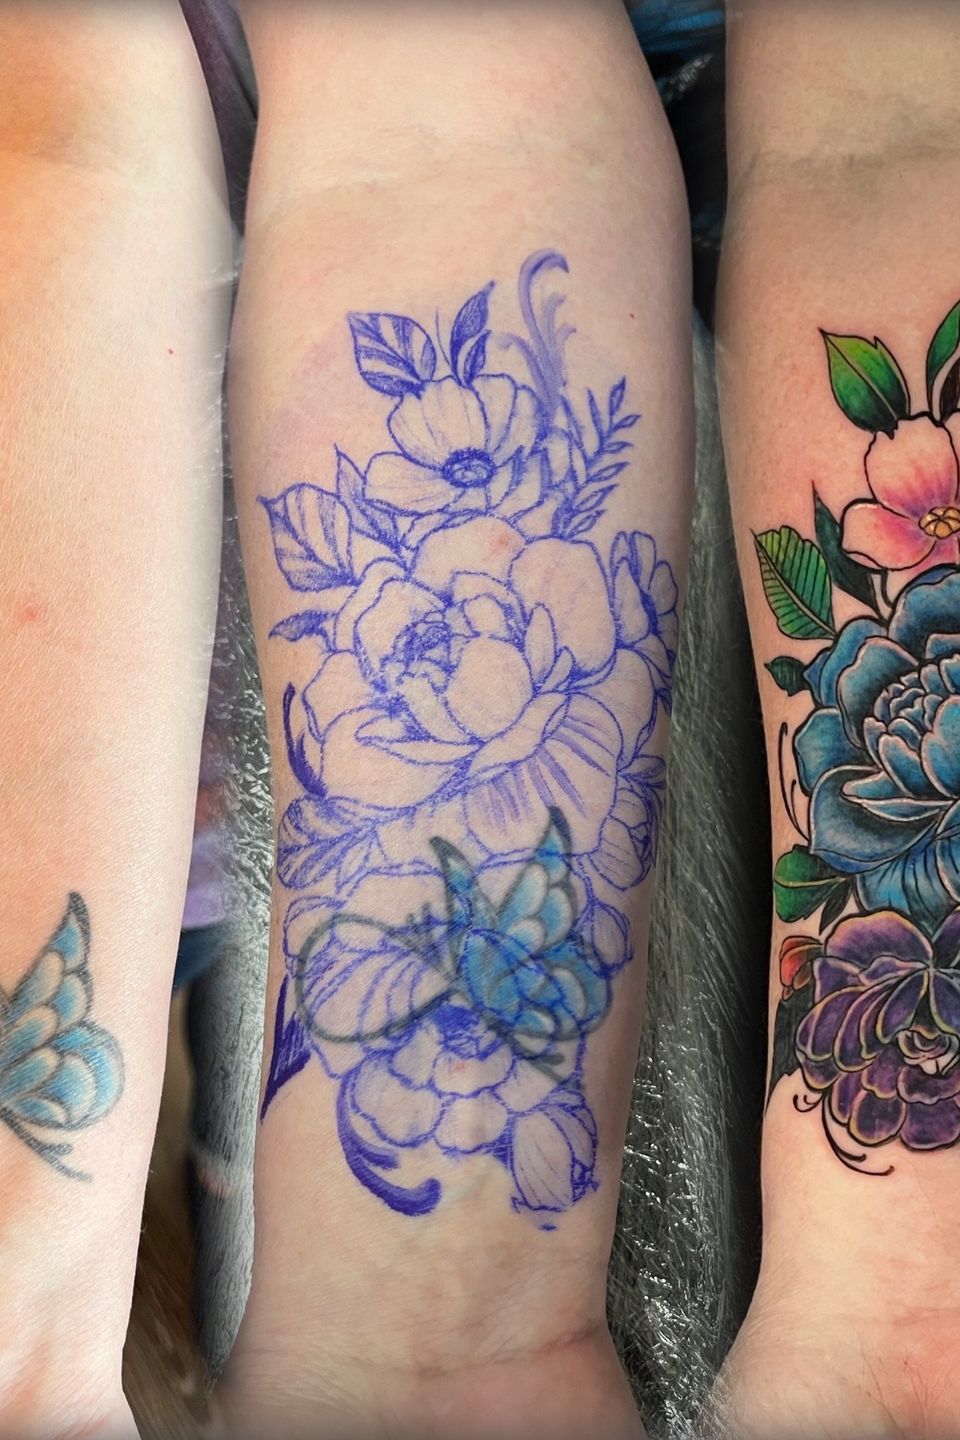 Josh flowers cover up